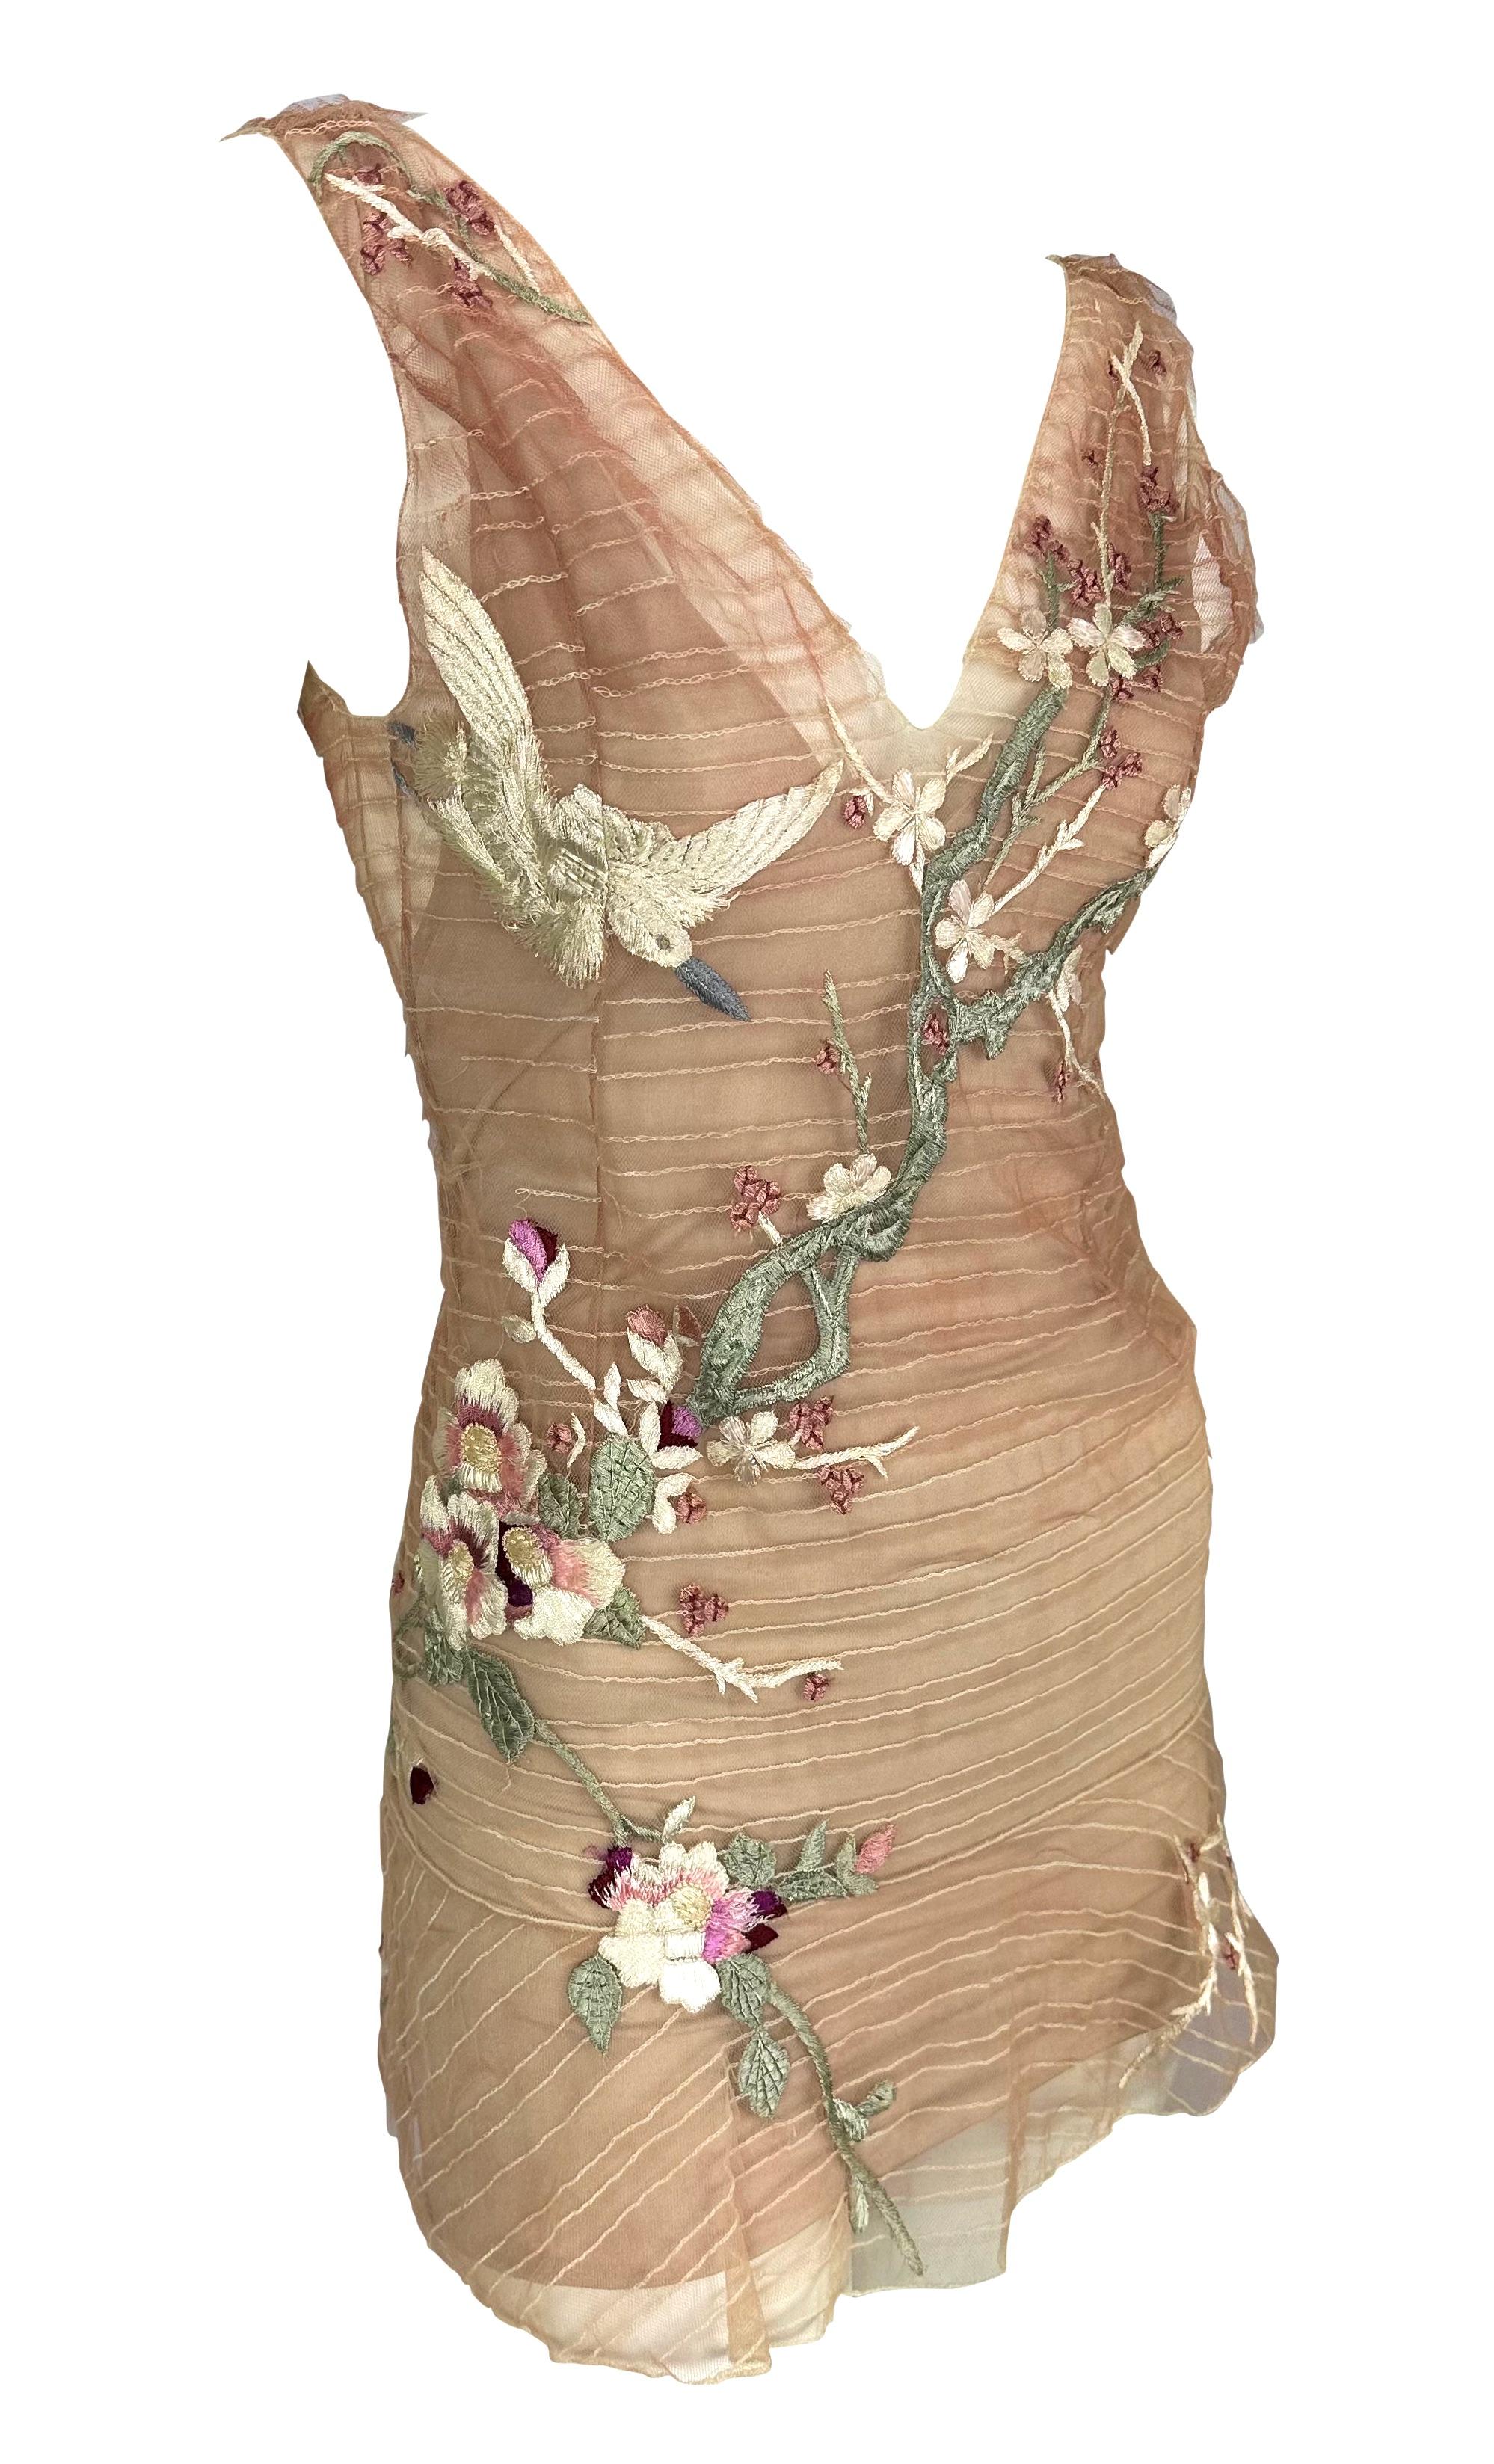 Women's S/S 2003 Gucci by Tom Ford Runway Cherry Blossom Embroidered Pink Mini Dress For Sale